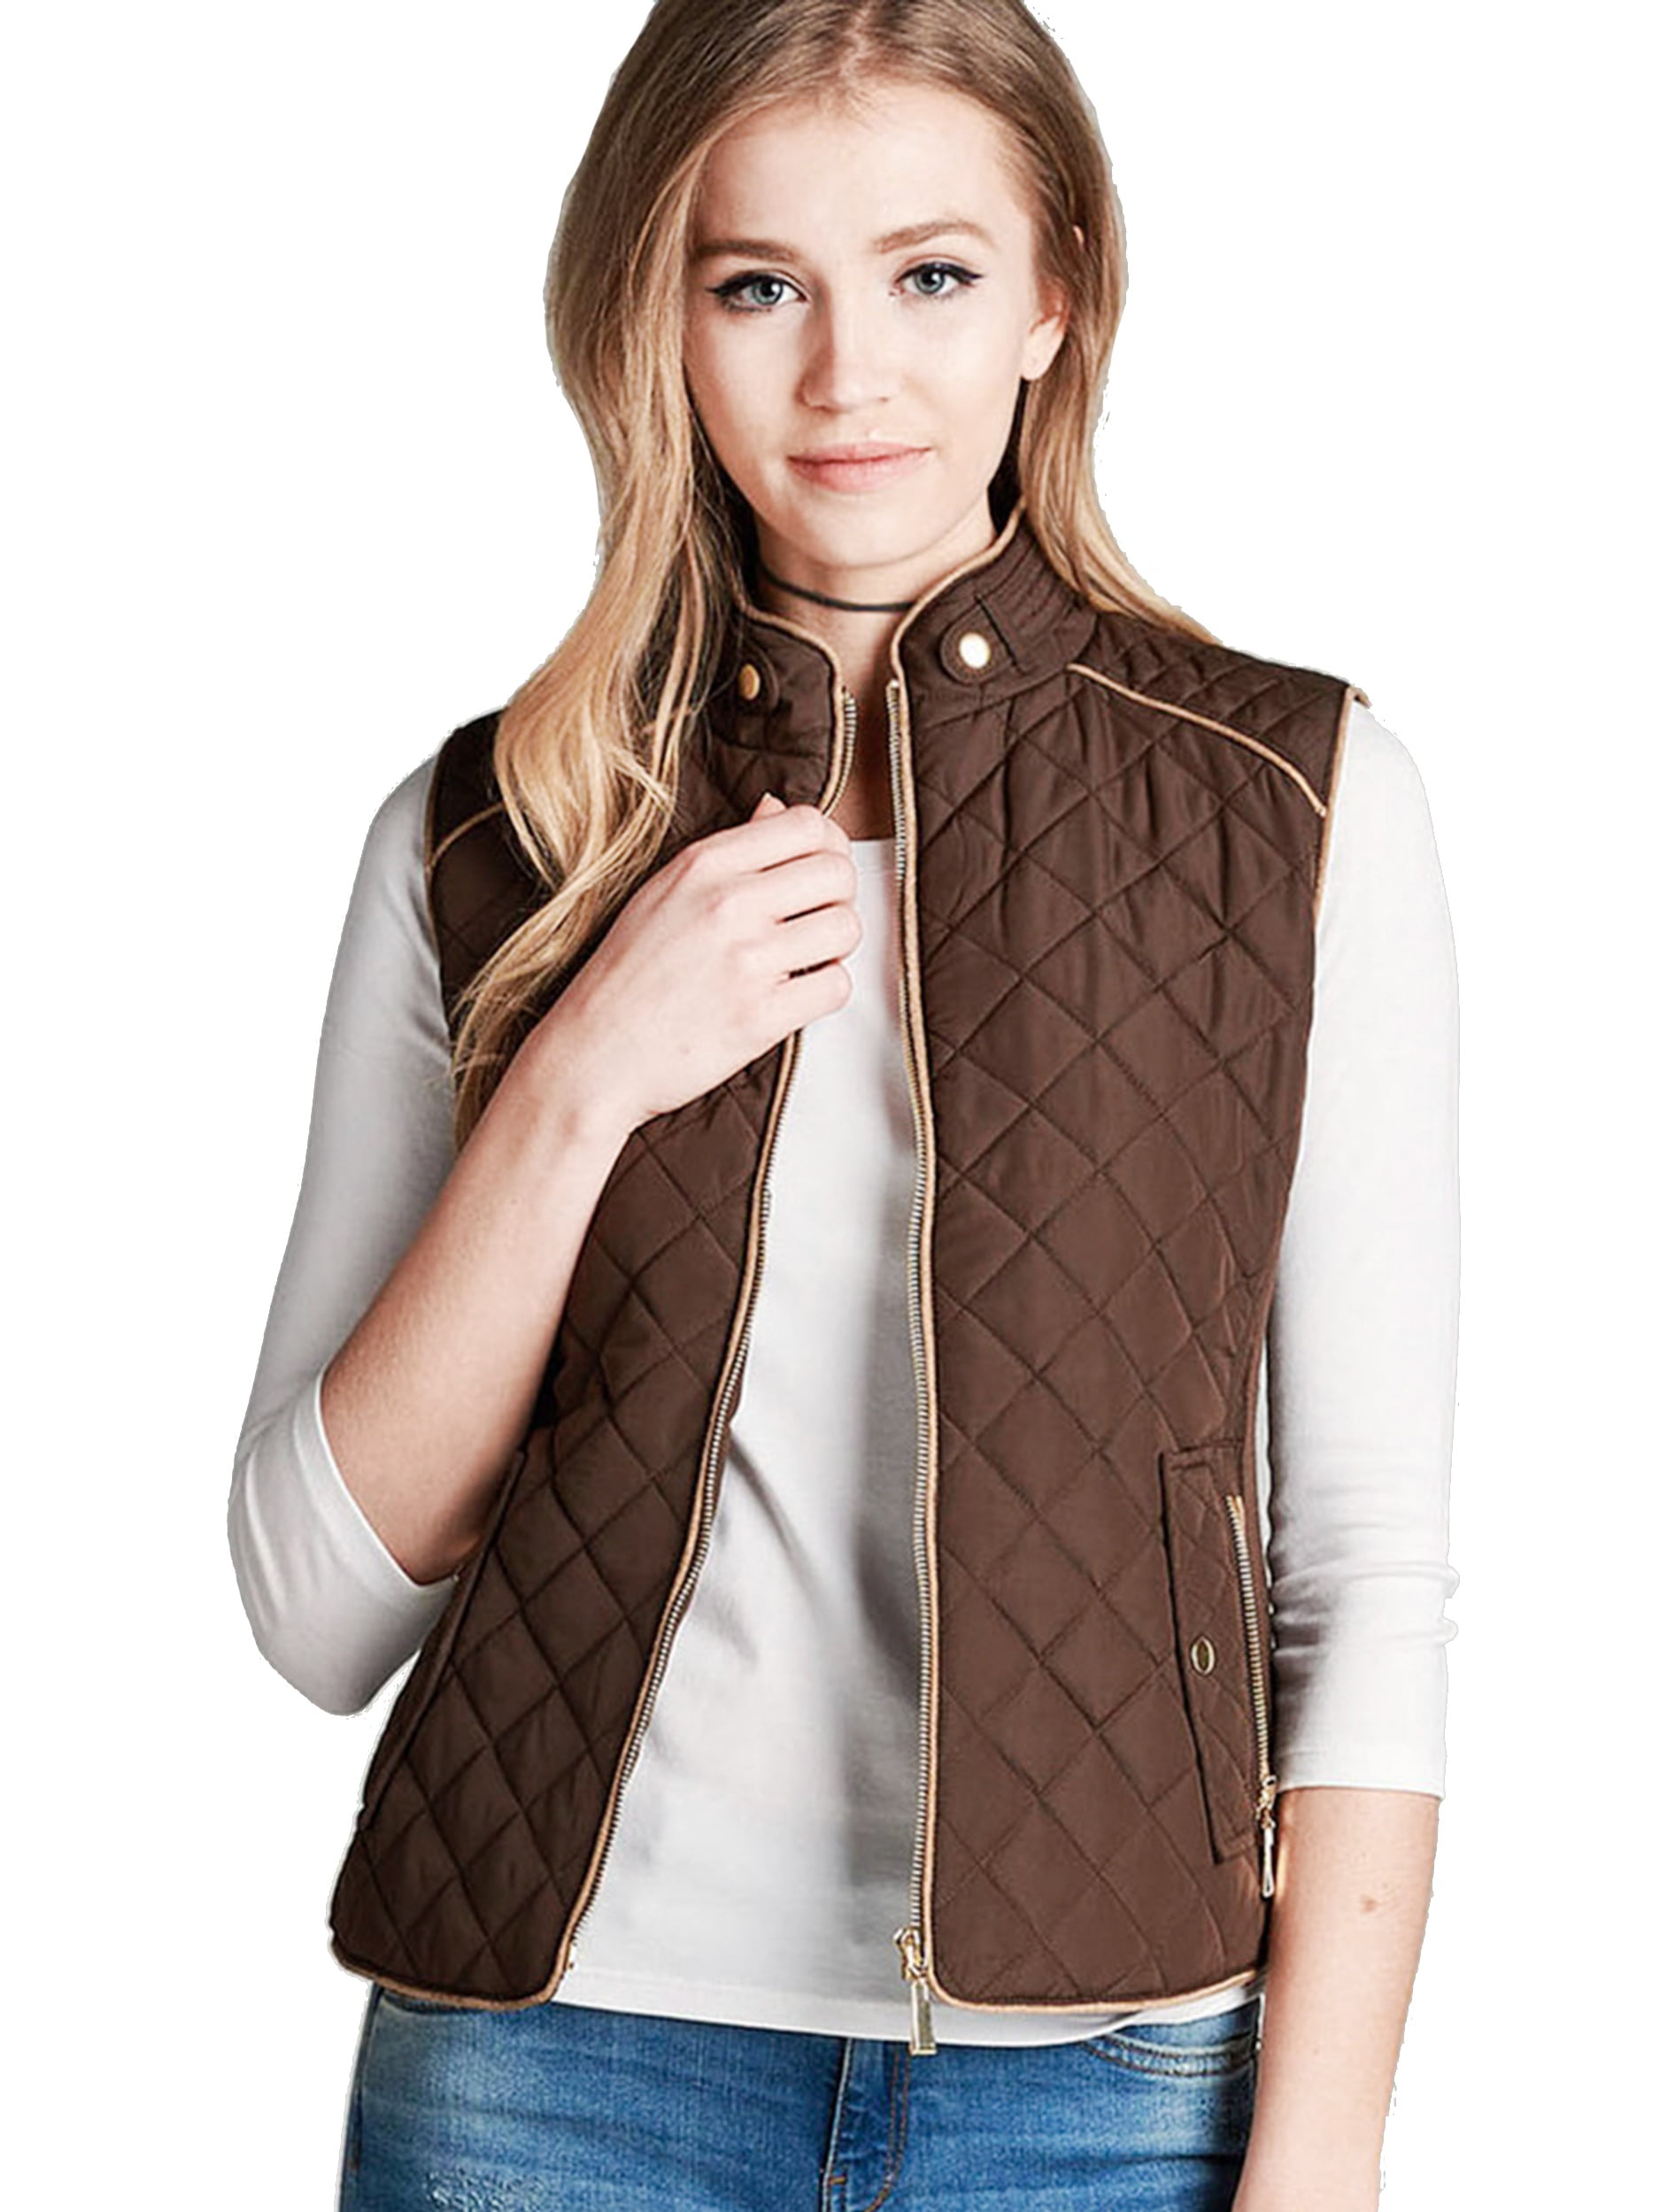 Women's Lightweight Quilted Padding Zip Up Jacket Vest-Plus Size ...